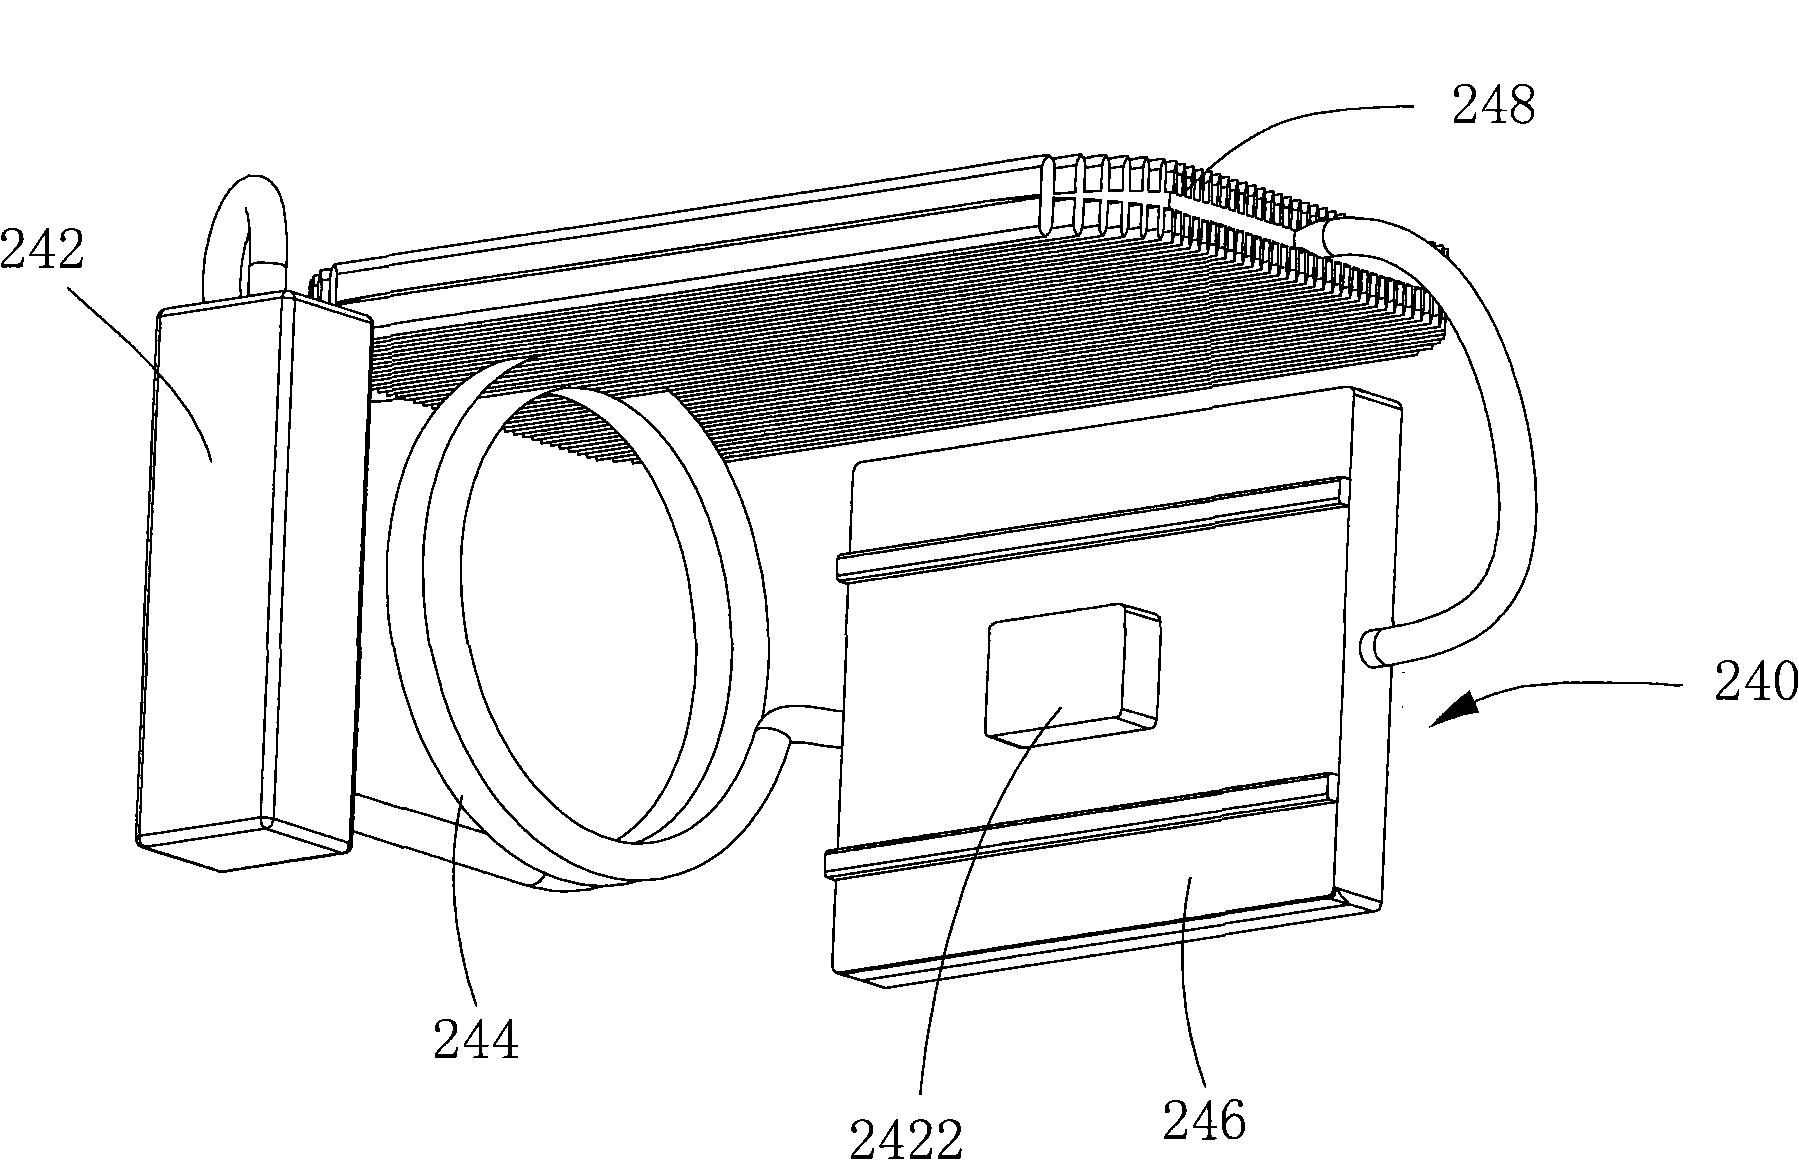 Liquid cooling and heat dissipating system for digital light processing (DLP) projector